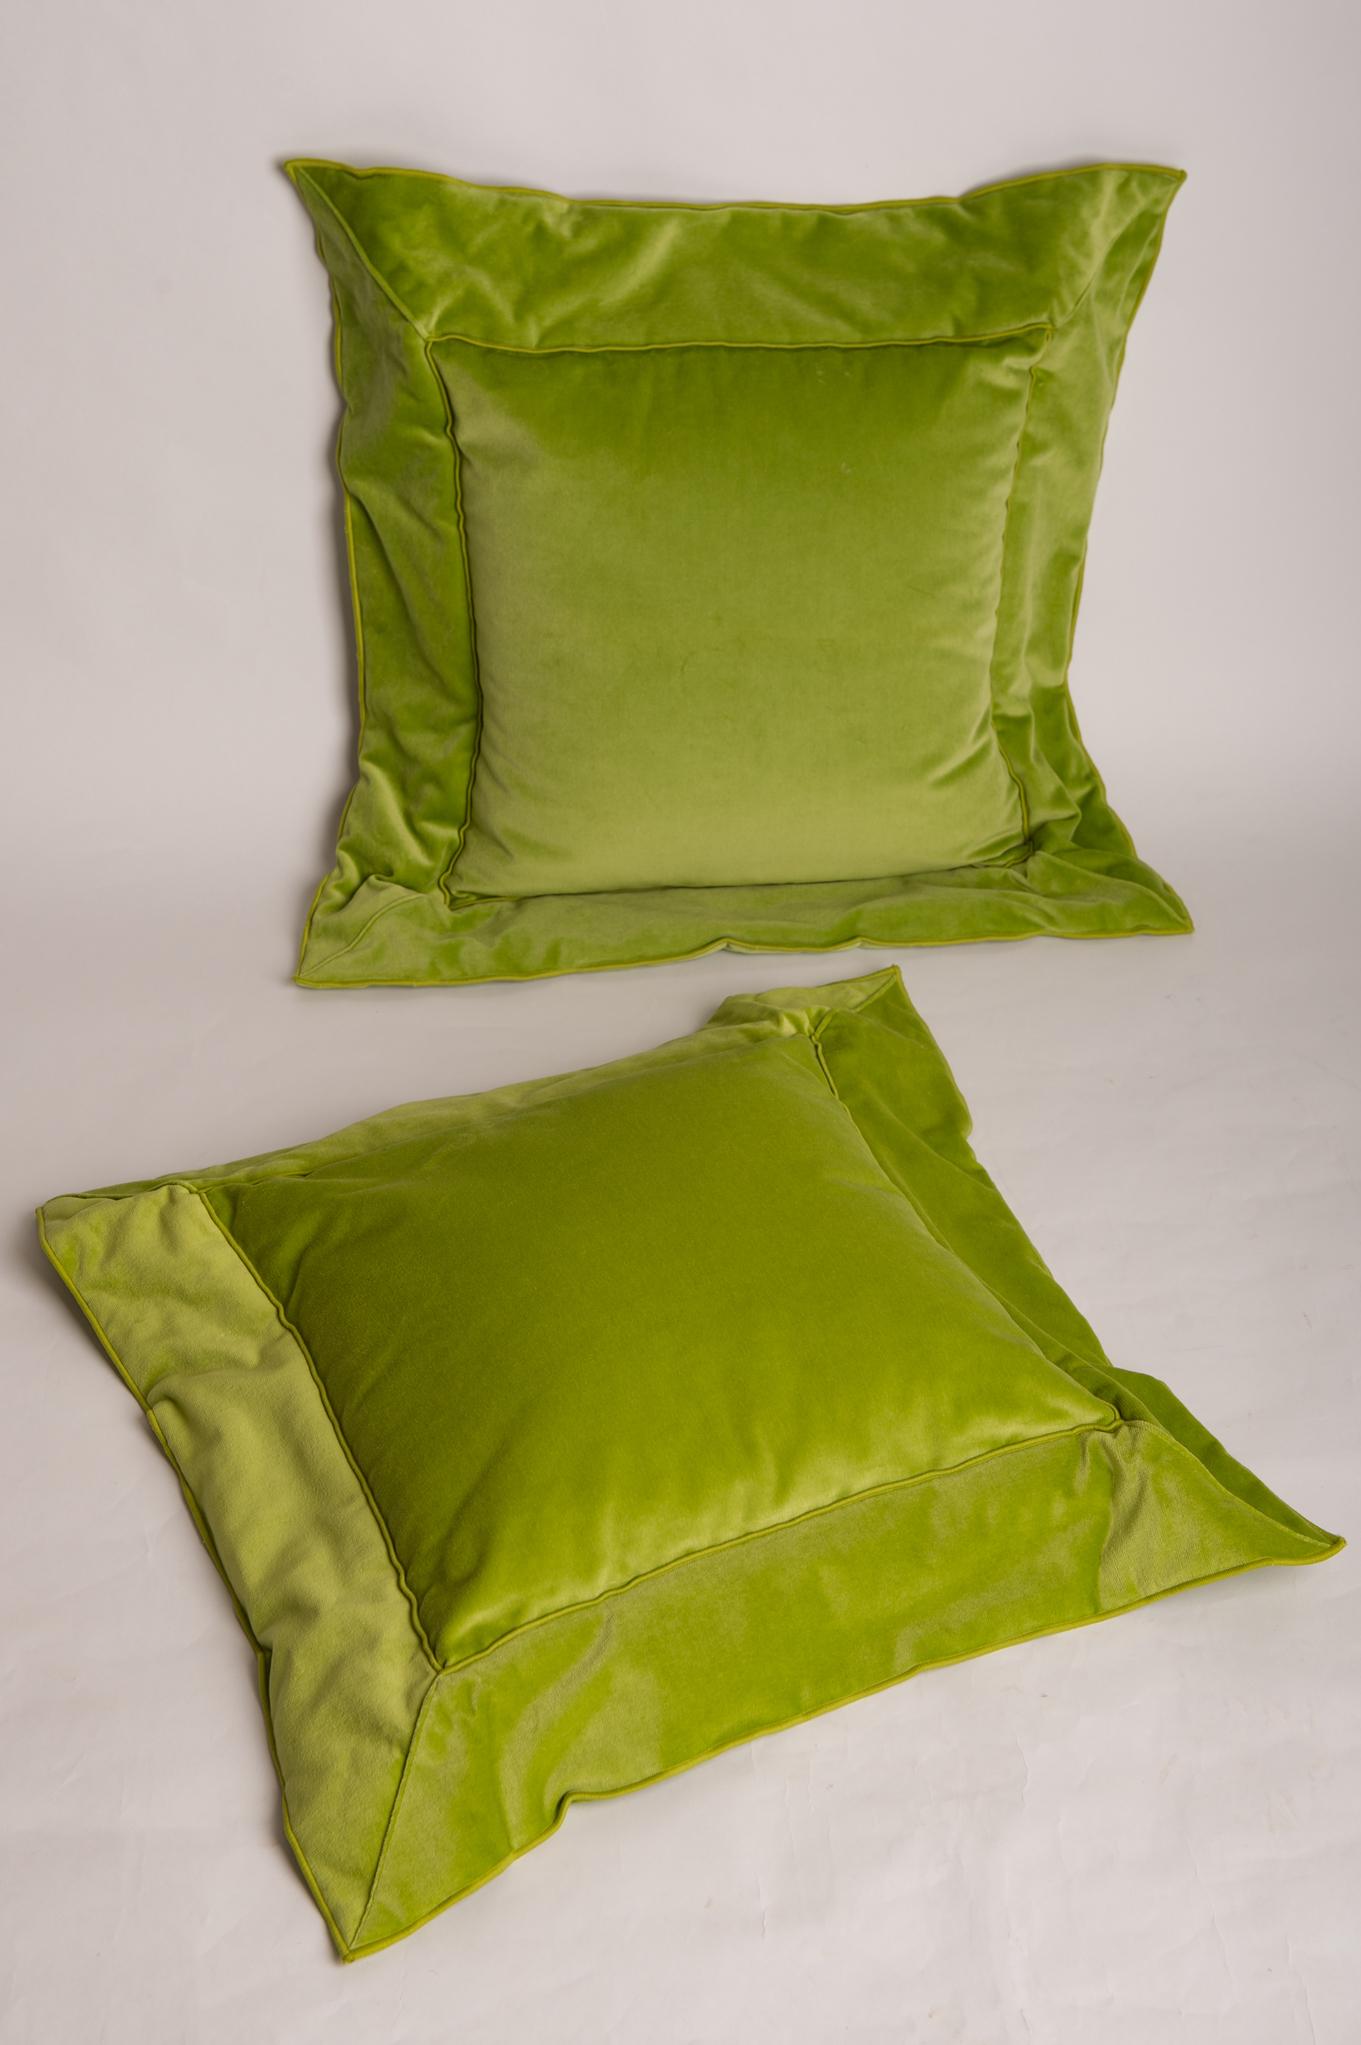 These cushions were made by a famous Swiss workshop (whose name I don't remember), with a beautiful green velvet.
Size are cm. 40 x 40 (padding) with a 12 cm. band all around.

